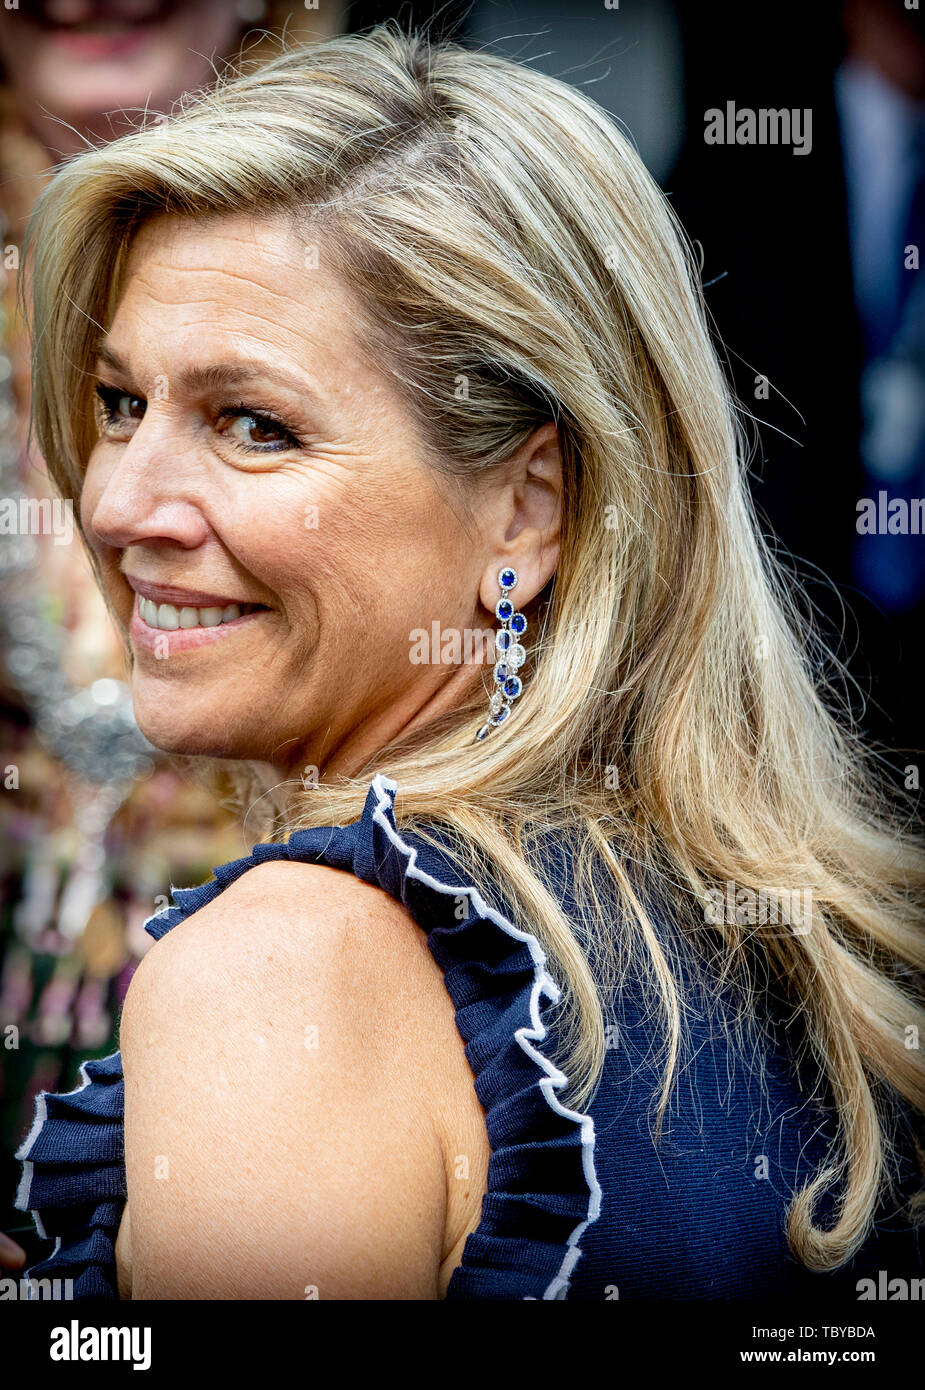 The Hague, The Netherlands. 4th June, 2019. Queen Maxima of The Netherlands attends the Global Entrepreneurship Summit (GES) in the World Forum in The Hague, The Netherlands, 4 June 2019. Credit: Patrick van Katwijk |/dpa/Alamy Live News Stock Photo